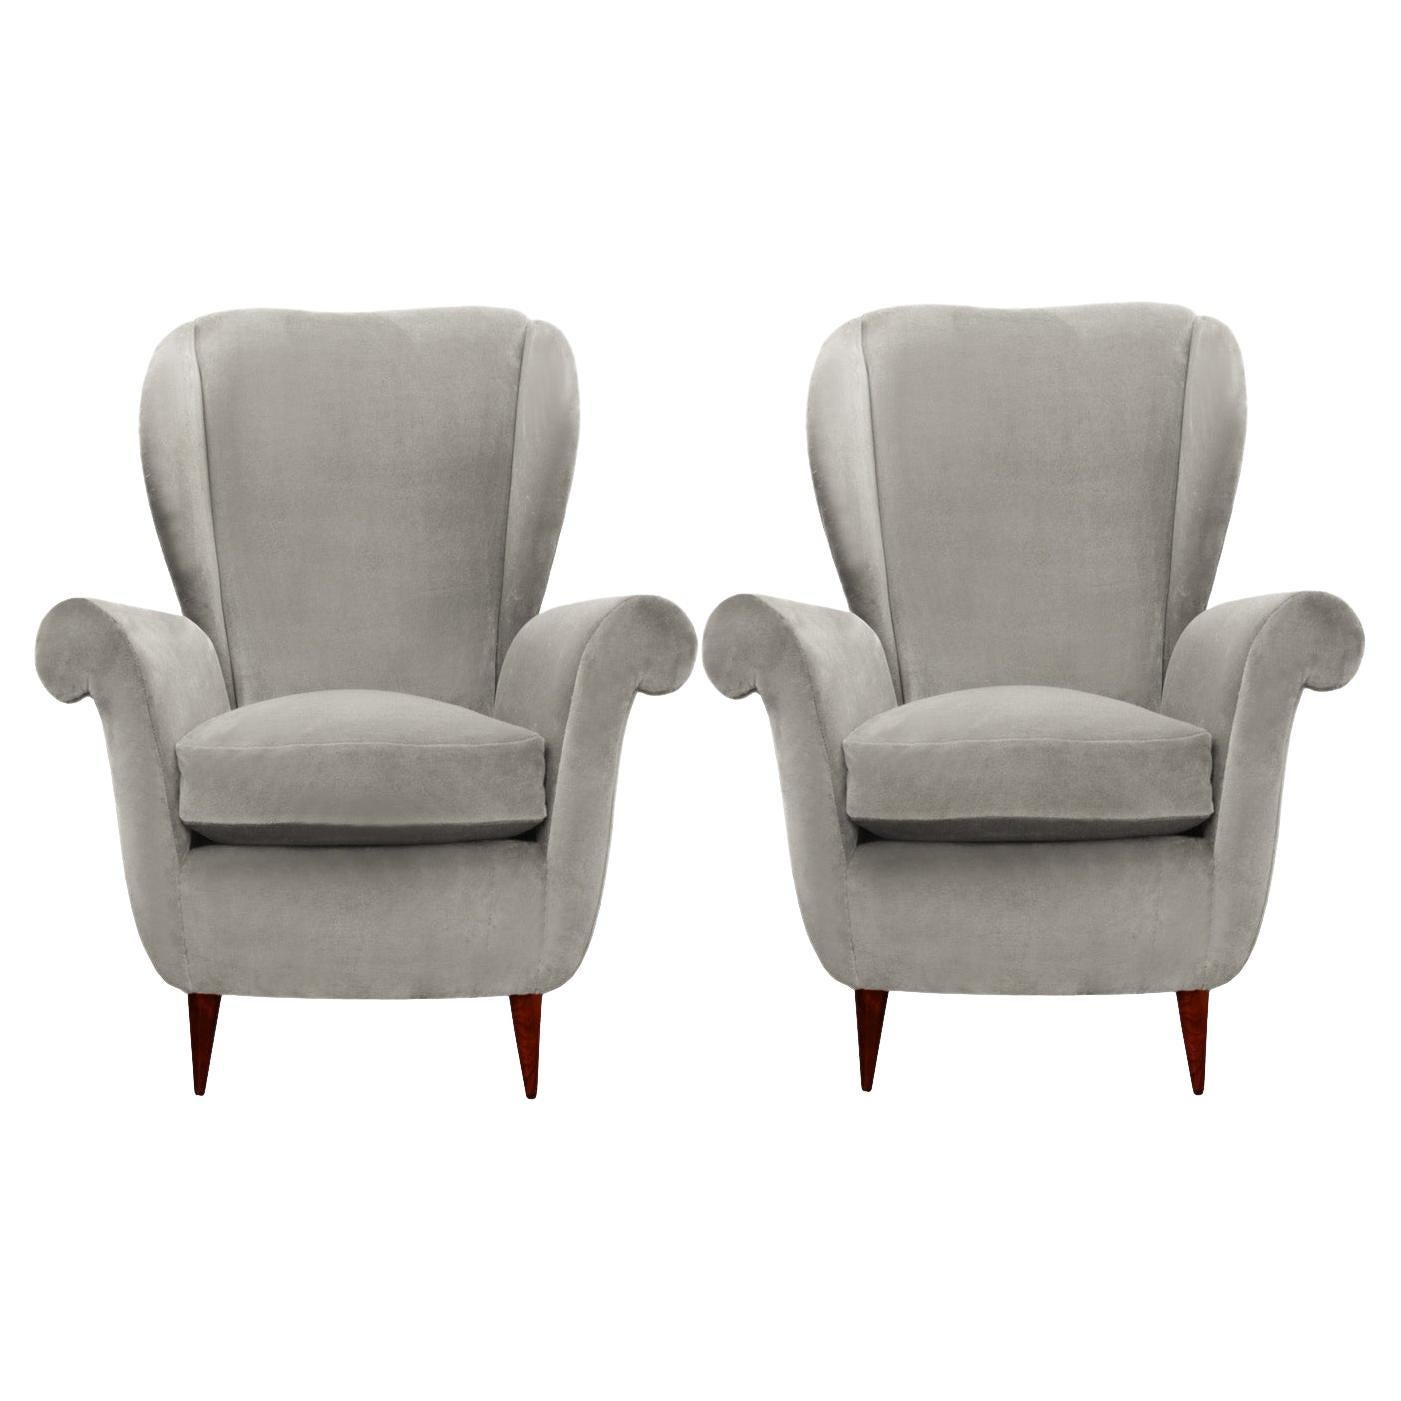 Stylish Pair of Mid-Century Modern High Back Wing Chairs, 1950s